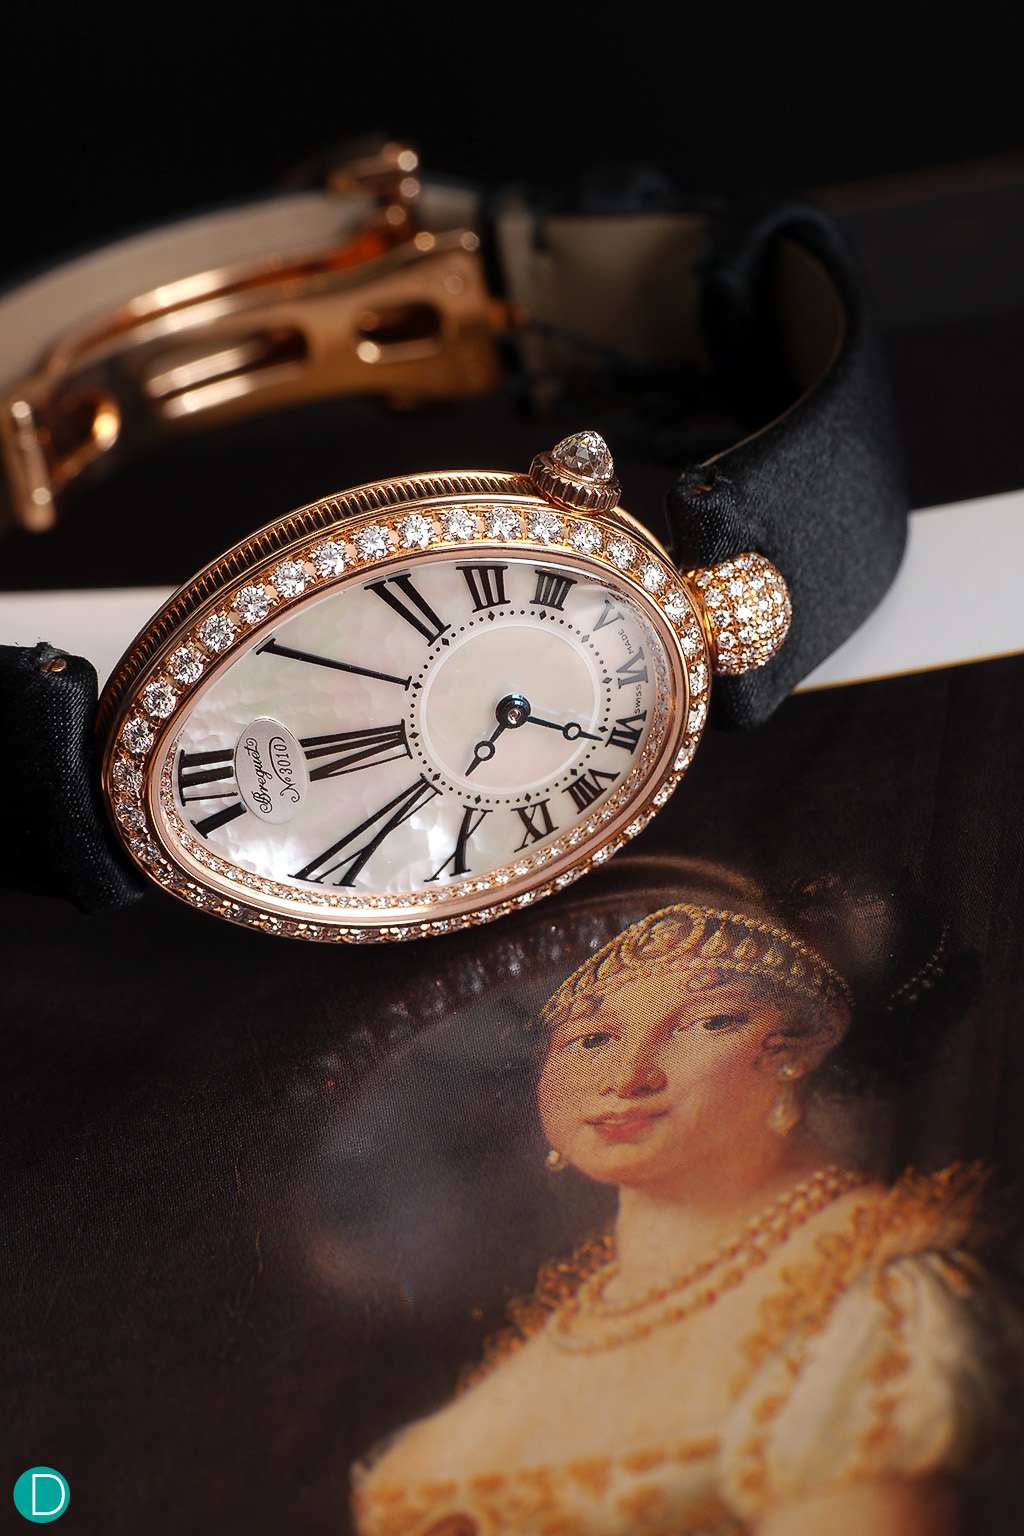 The Breguet Reine de Naples, a magnificent wristwatch and the portrait of the Maria Caroline, the Queen of Naples who was the inspiration behind the design.